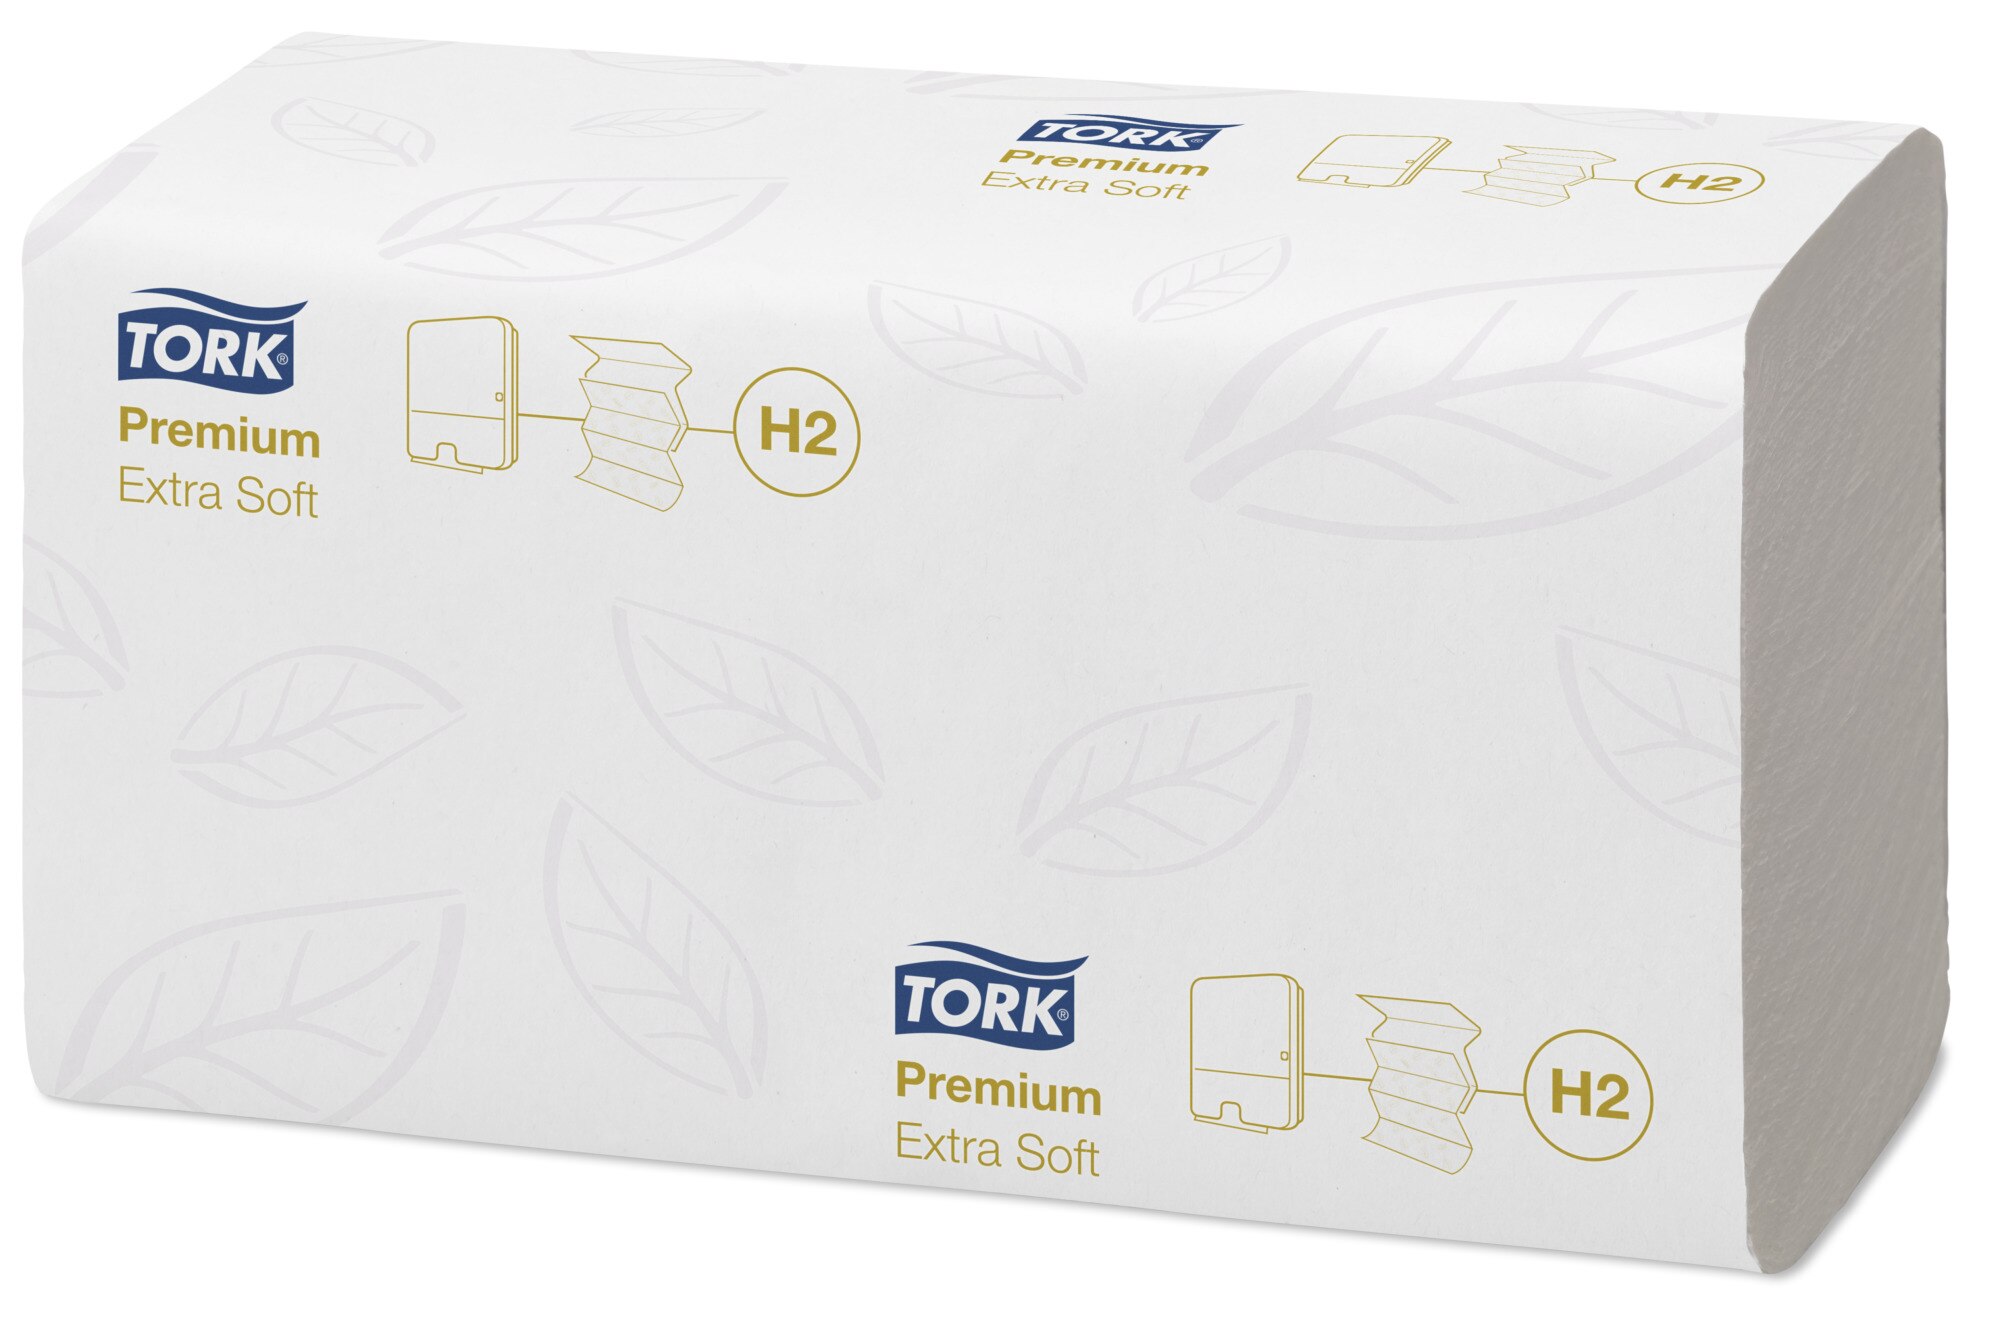 White with leaf Case of 21 Packs, 100 per Pack - 2100 Towels Tork 100297 Premium Extra Soft Xpress Multifold Hand Towel 